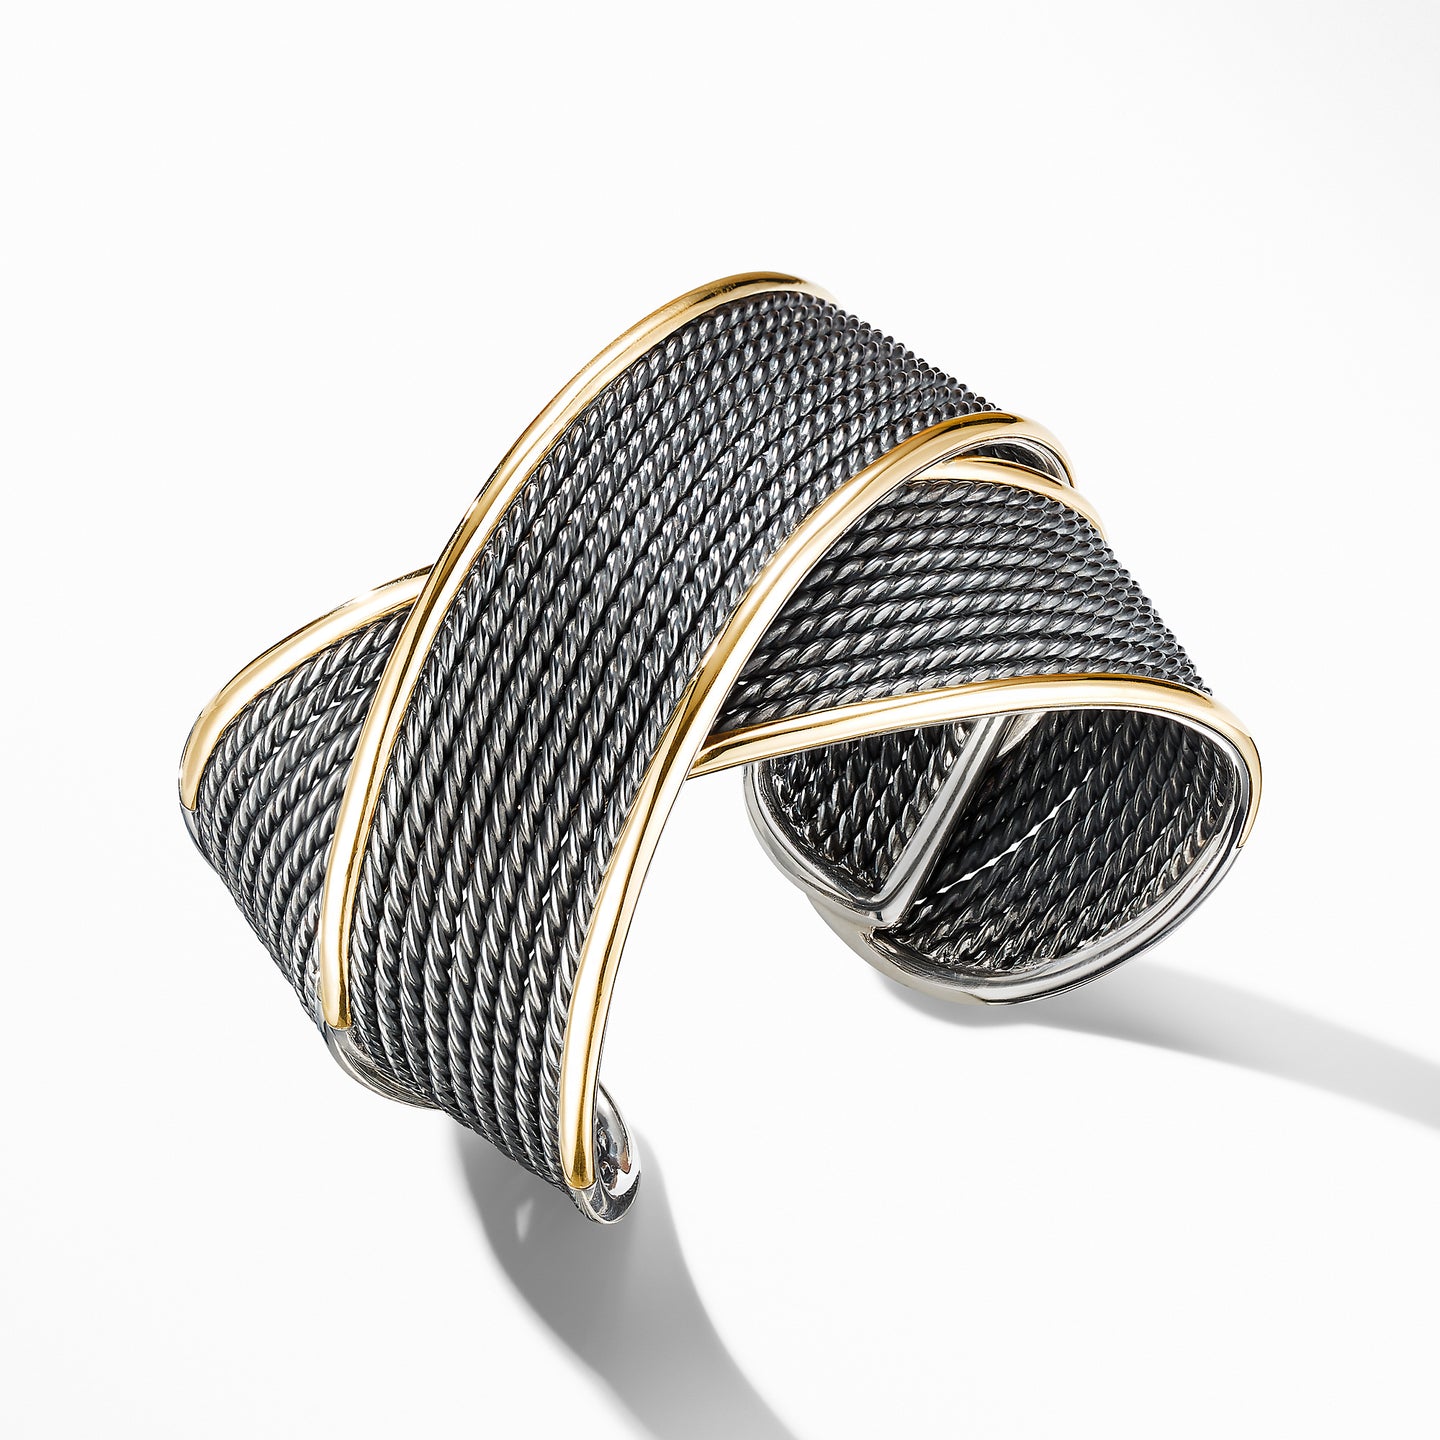 DY Origami Large Crossover Cuff Bracelet in Blackened Silver